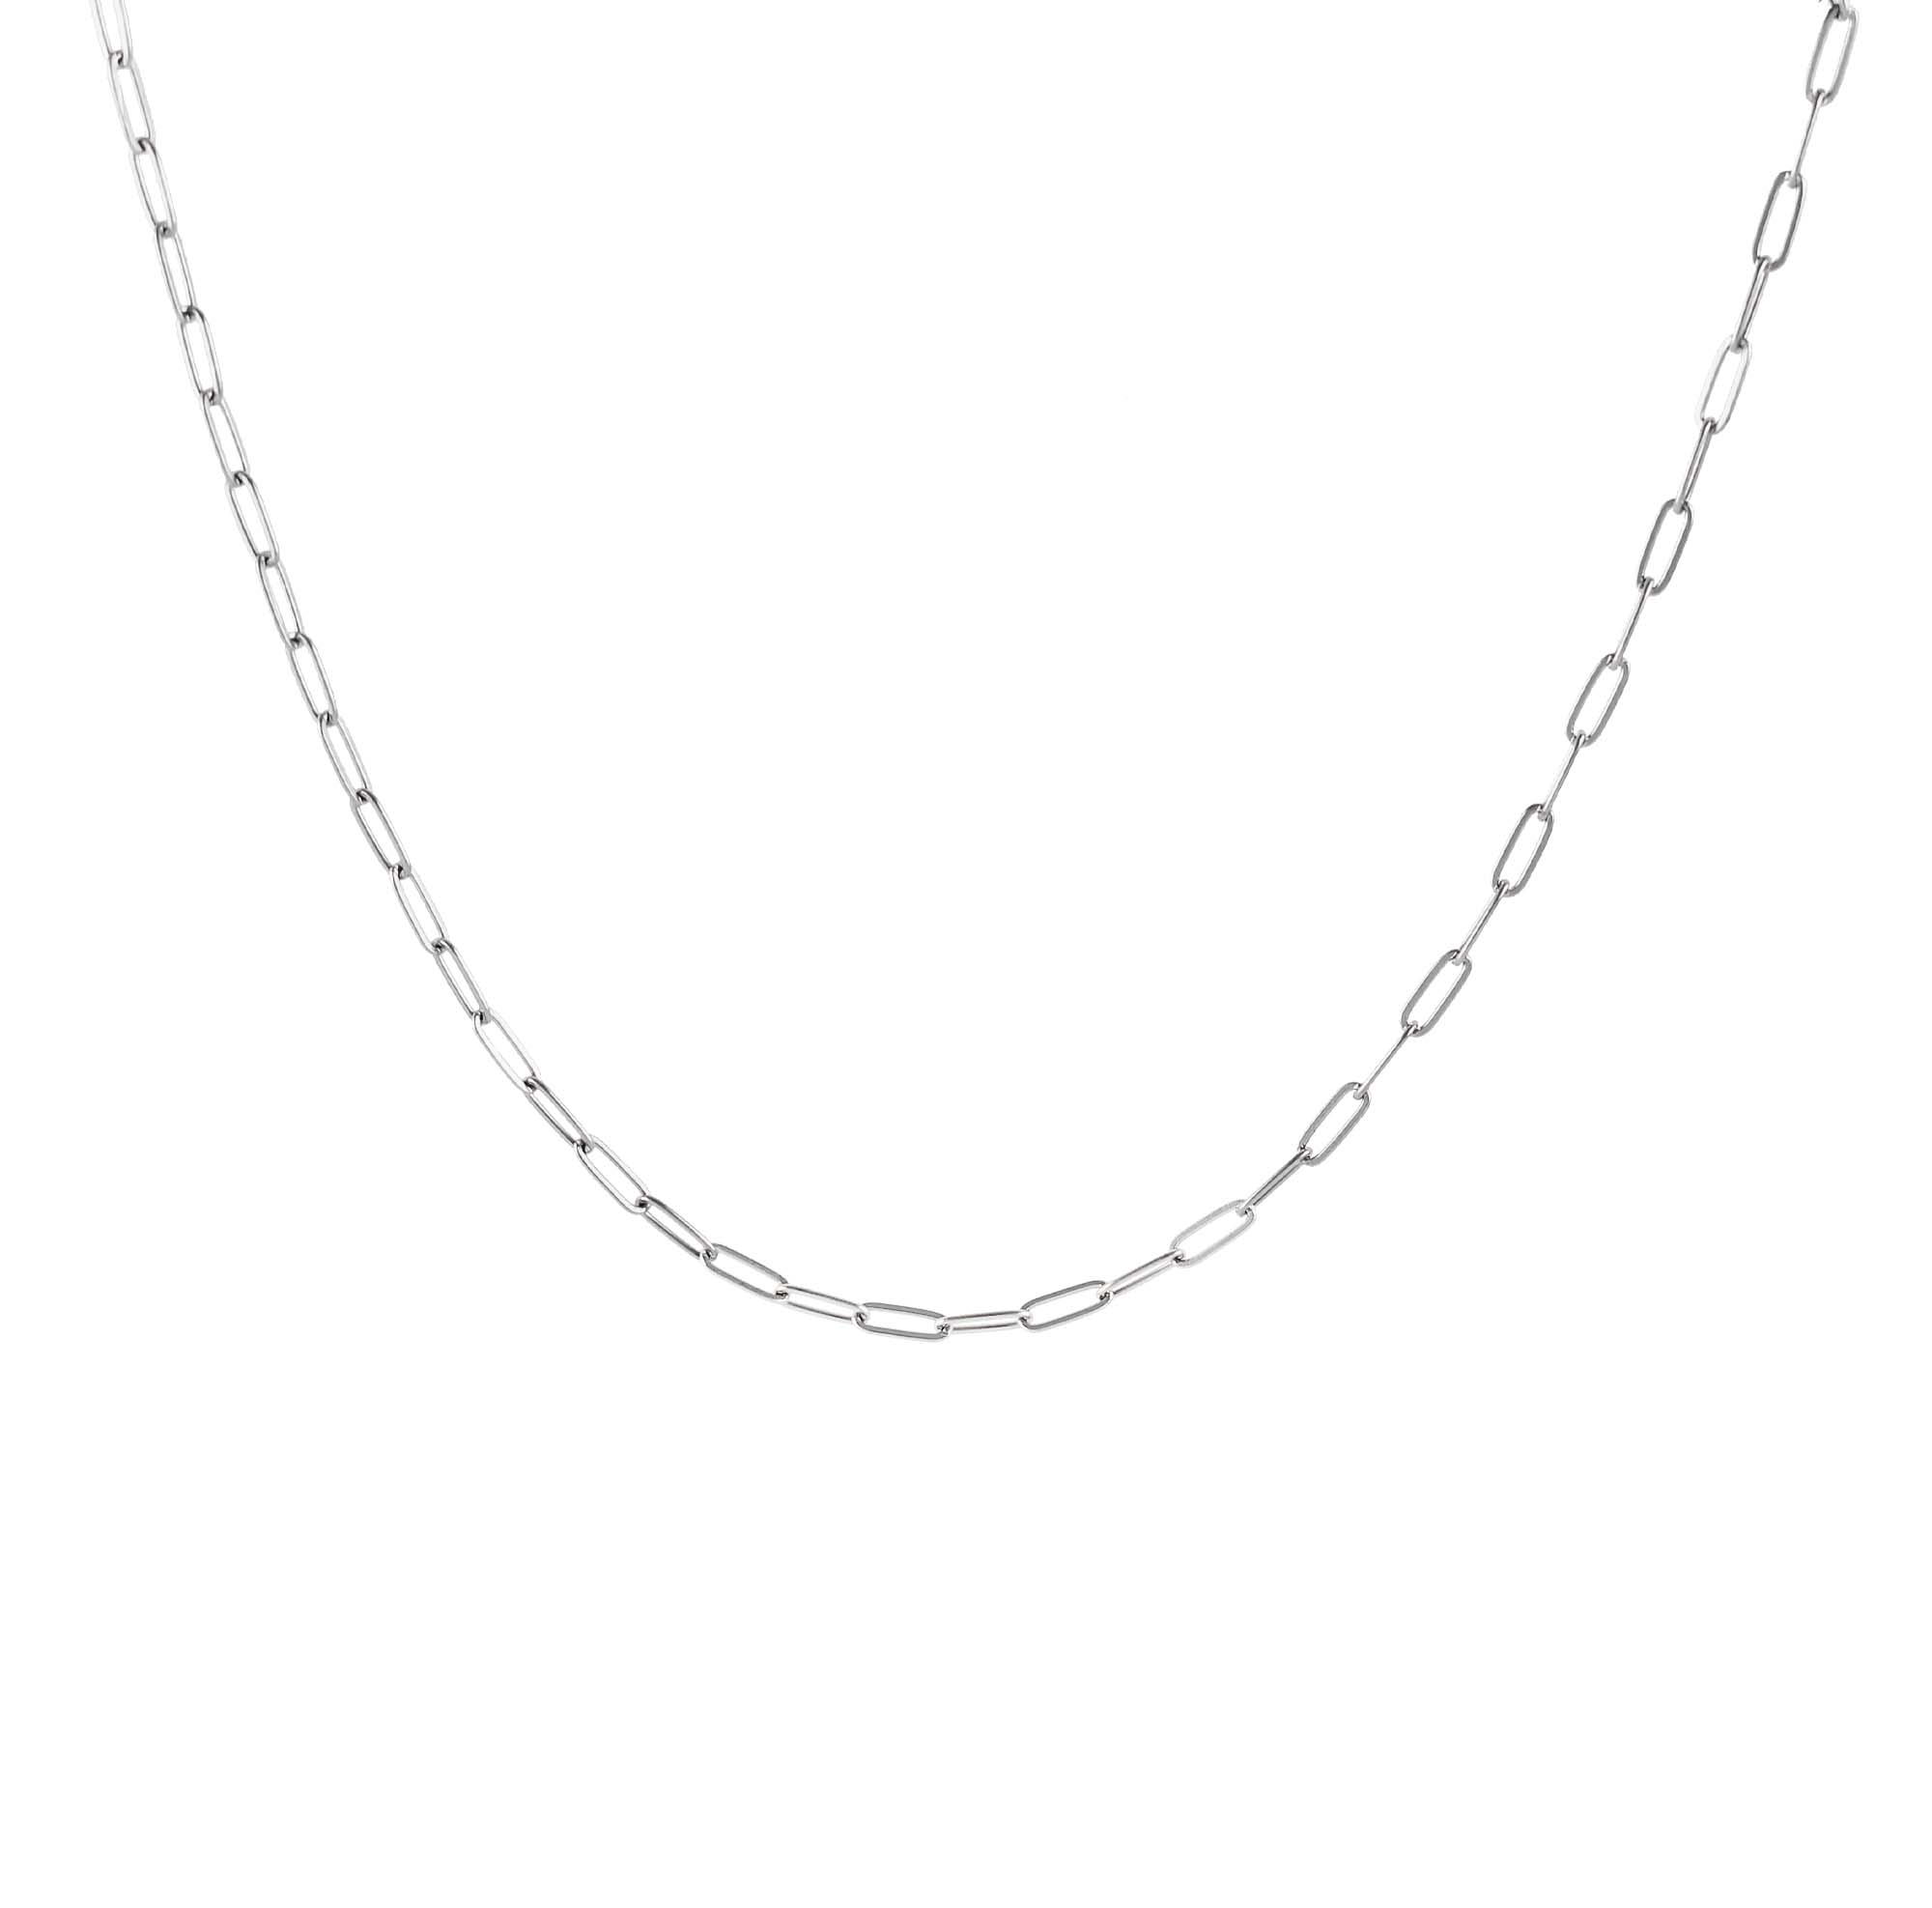 Maritsa women's necklace by Five Jwlry, crafted from a 3mm paperclip chain in silver-colored, water-resistant 316L stainless steel. Available in size 37cm with a 5cm extension. Hypoallergenic with a 2-year warranty.